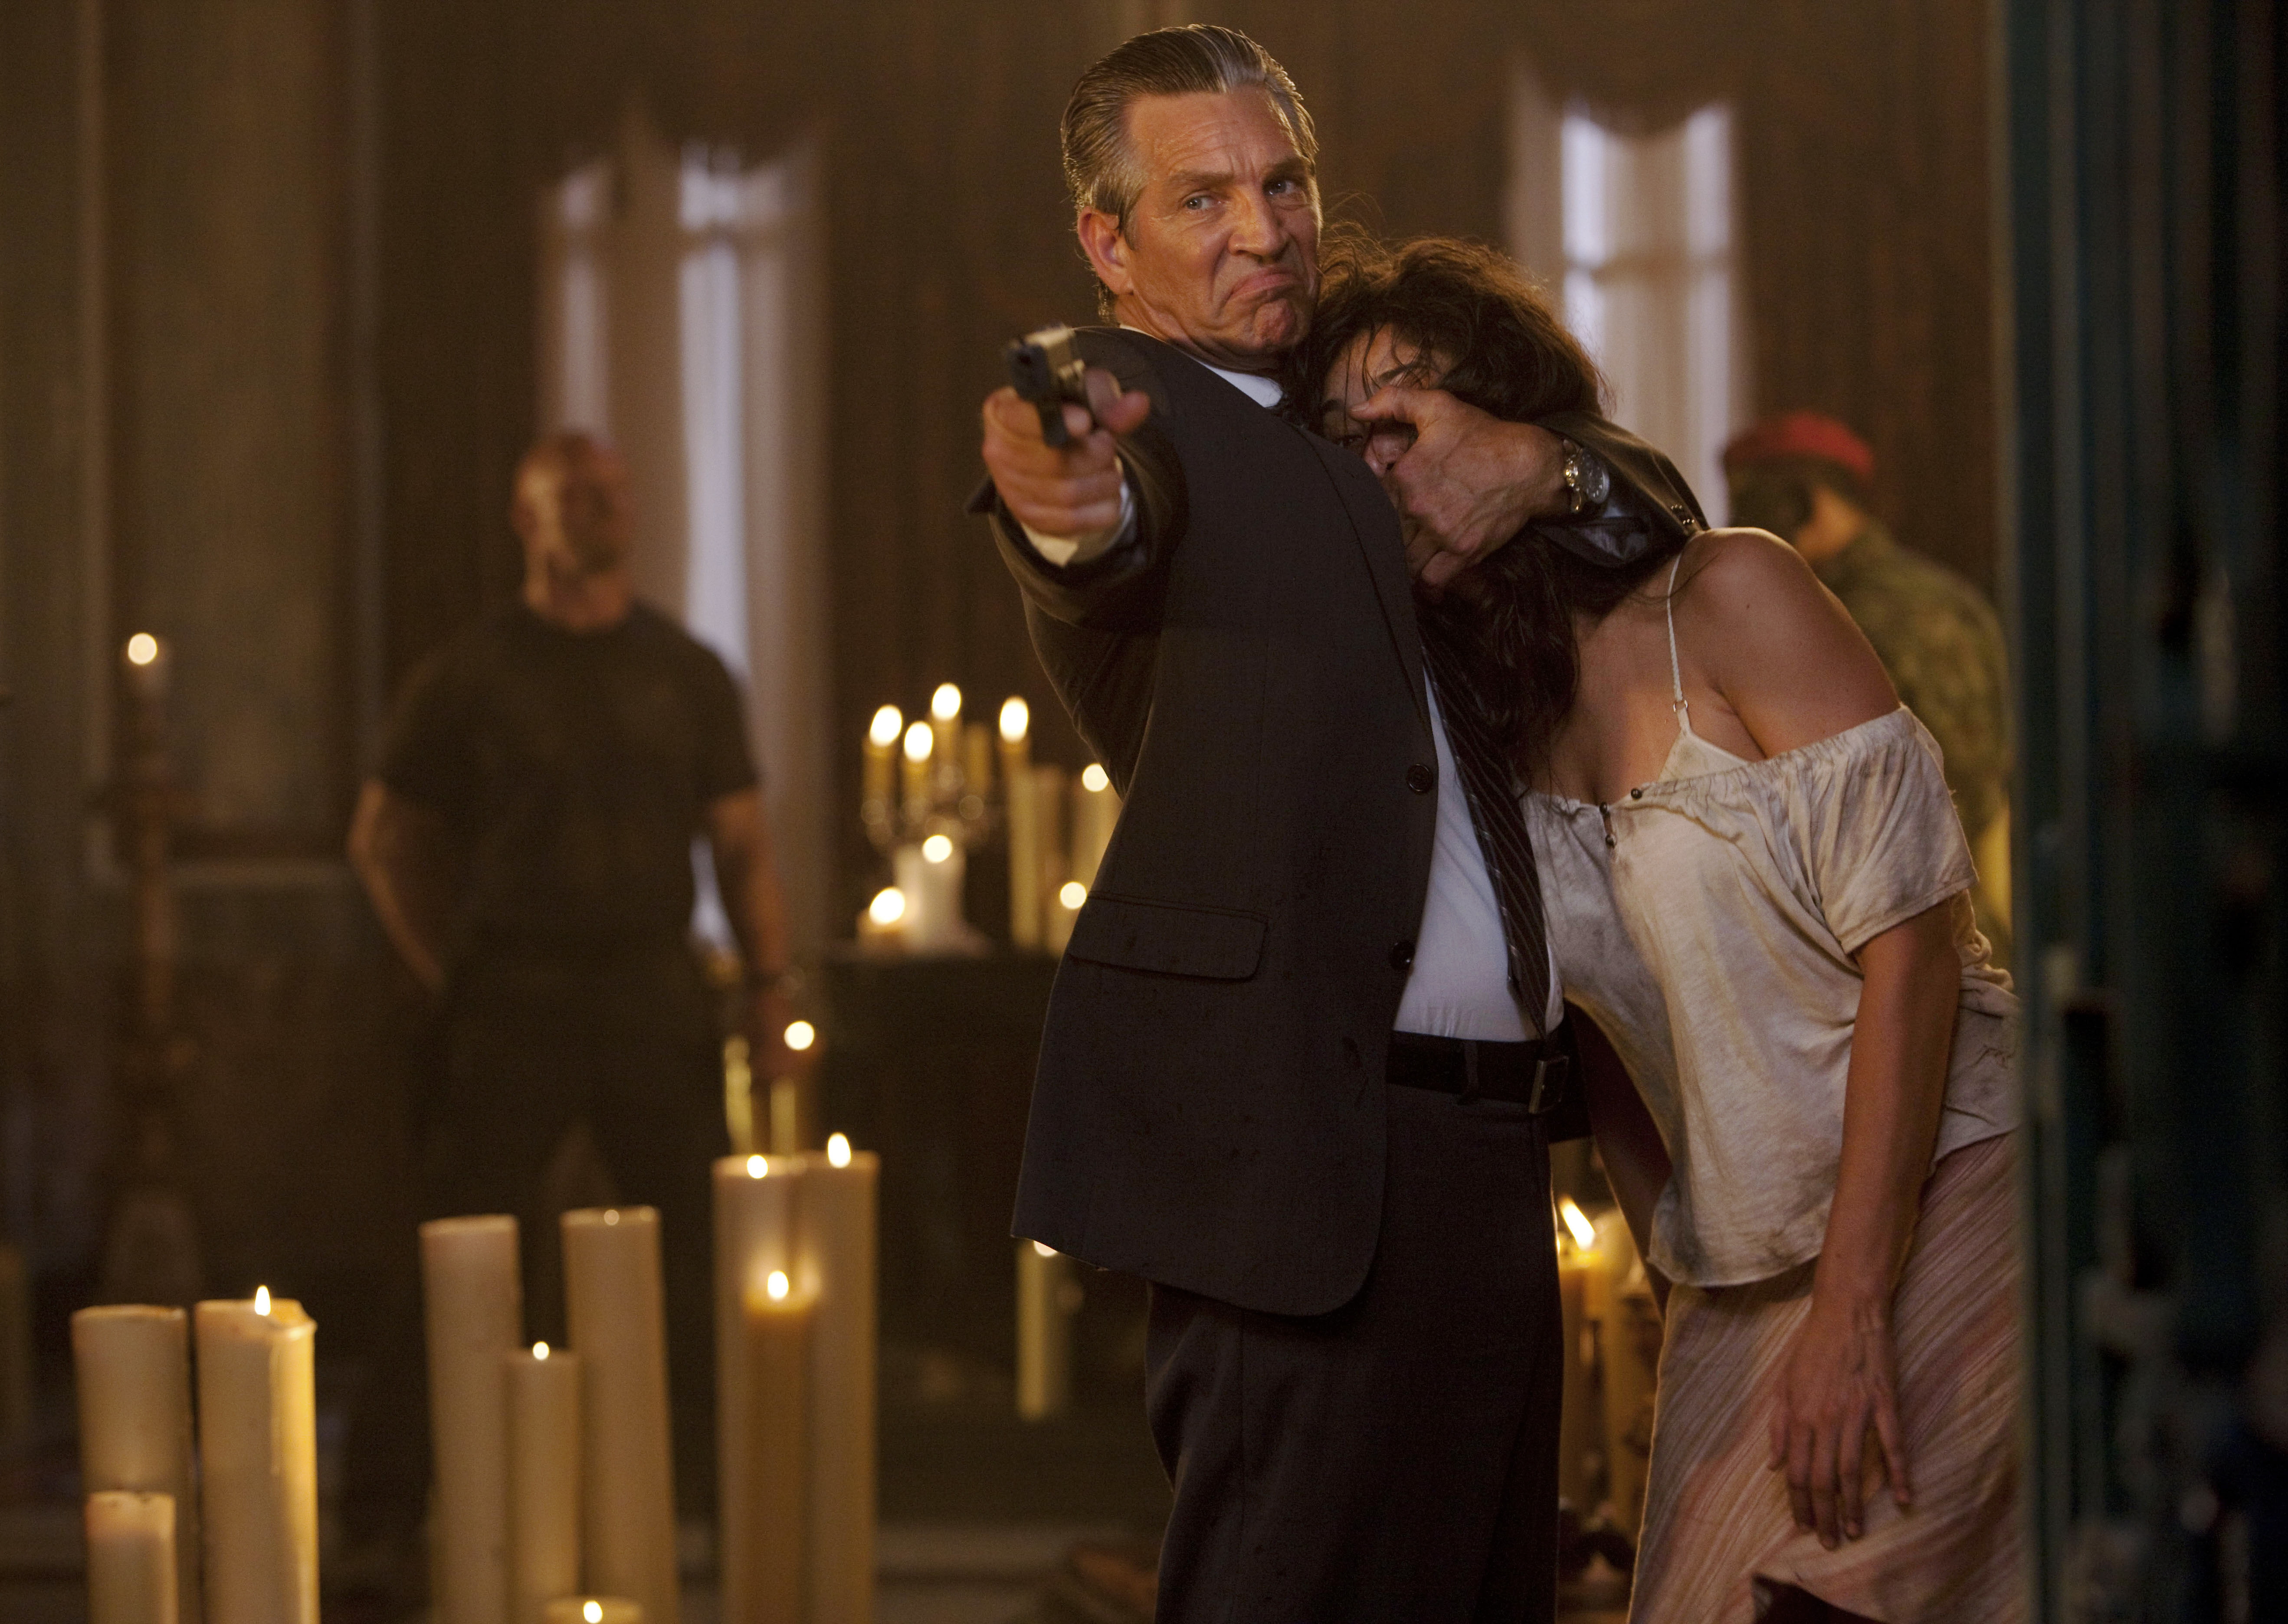 The Expendables Giselle Itie Sandra The Expendables Eric Roberts Monroe The Expendables 5274x3744